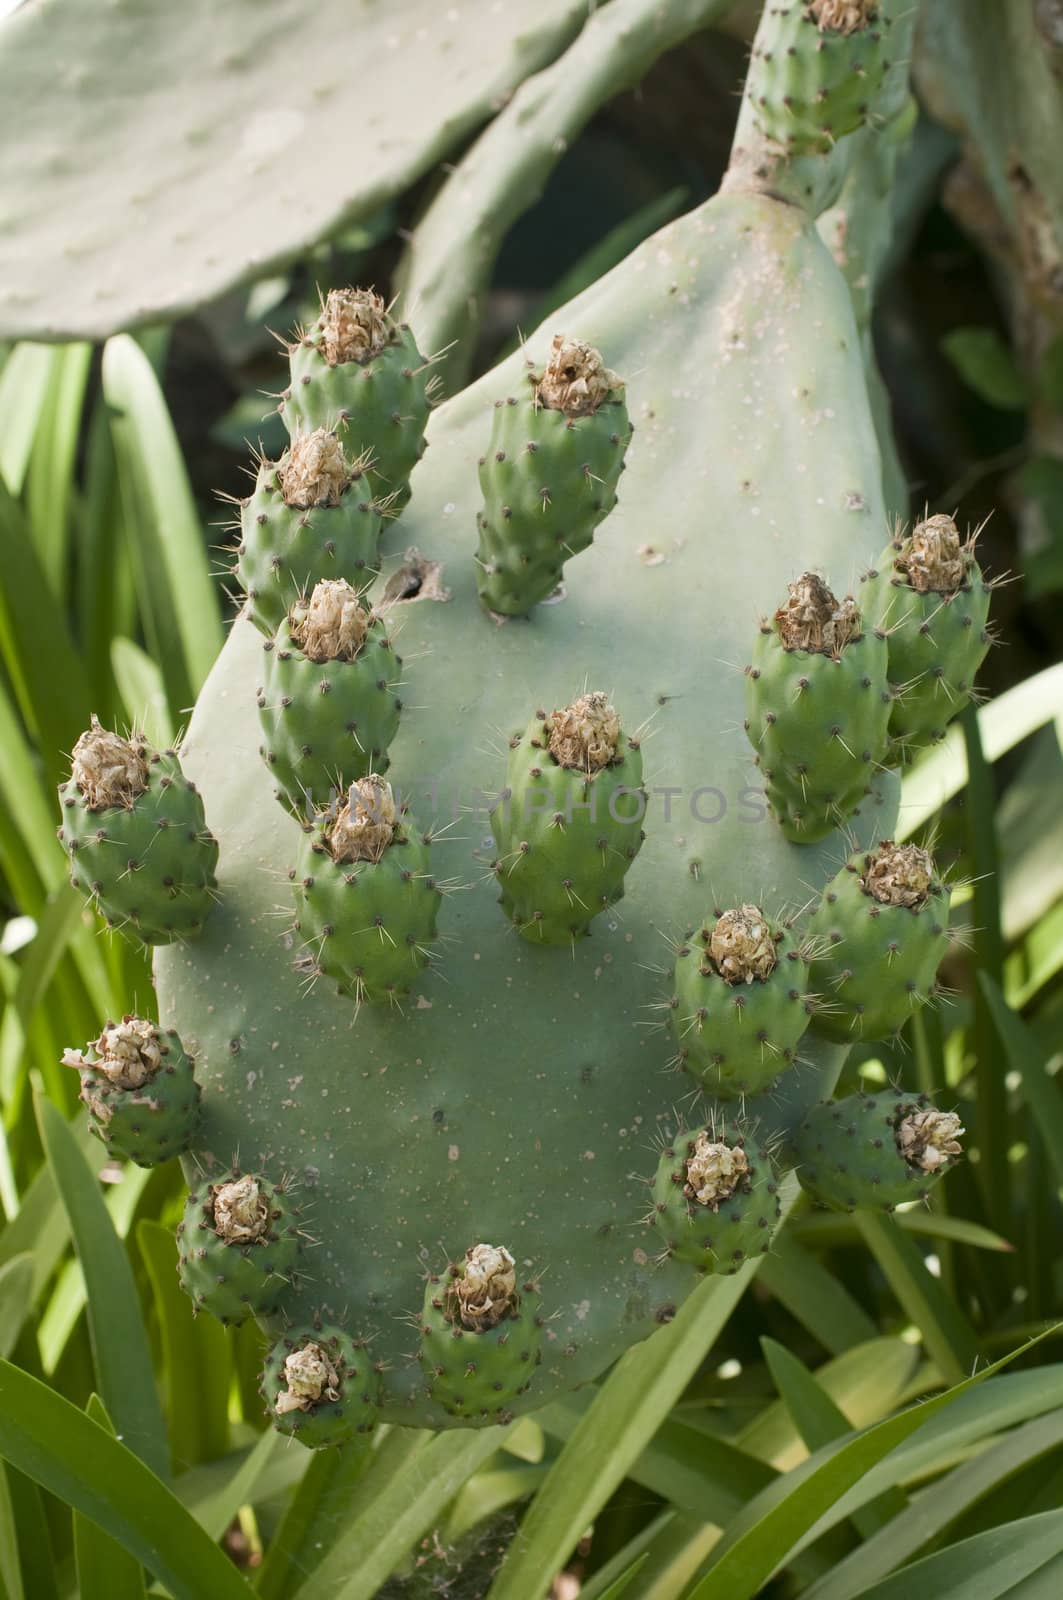 Prickly pears of Opuntia ficus/indica